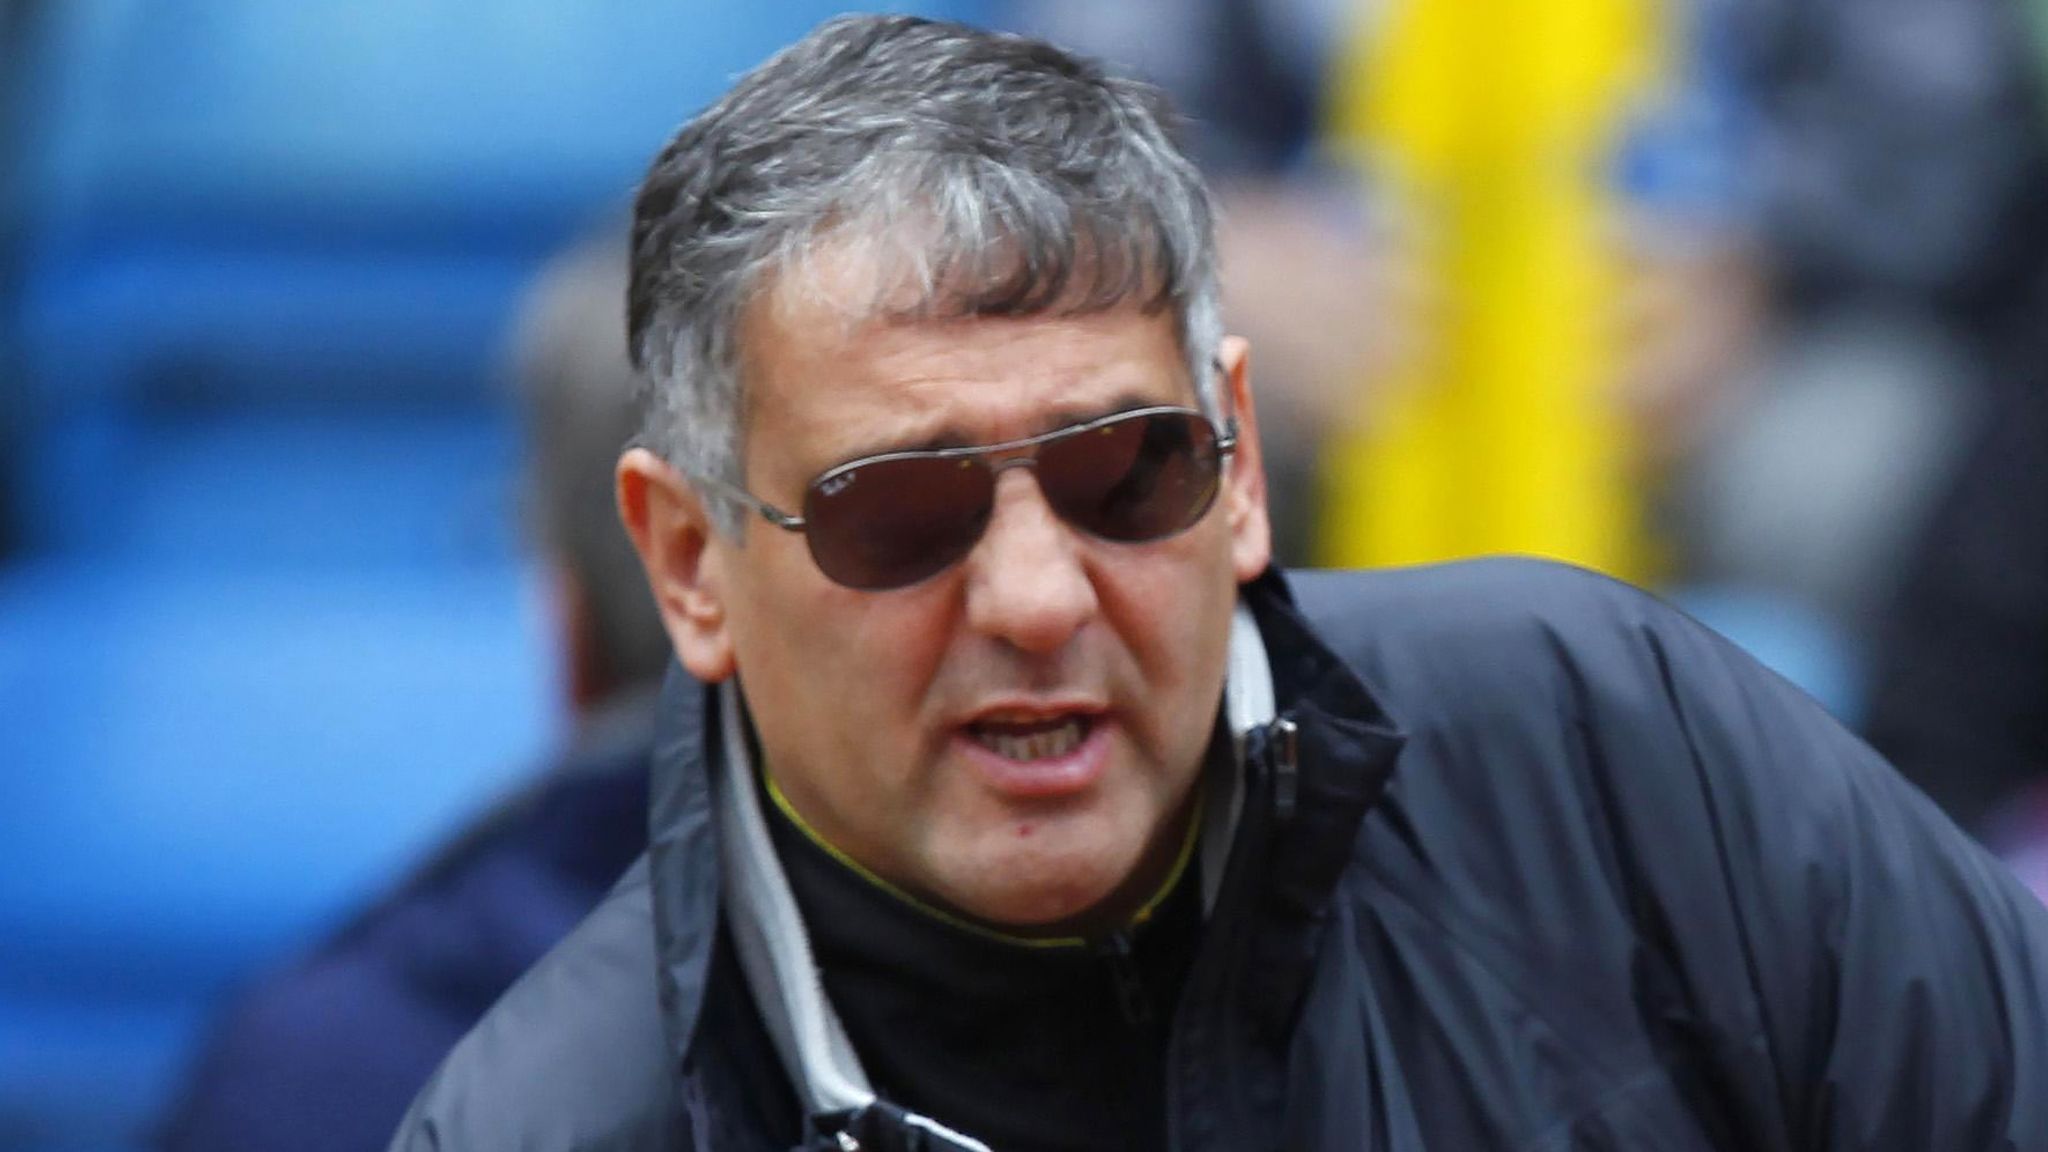 Toni Minichiello: Coach banned for life by UK Athletics following  investigation into conduct | Athletics News | Sky Sports